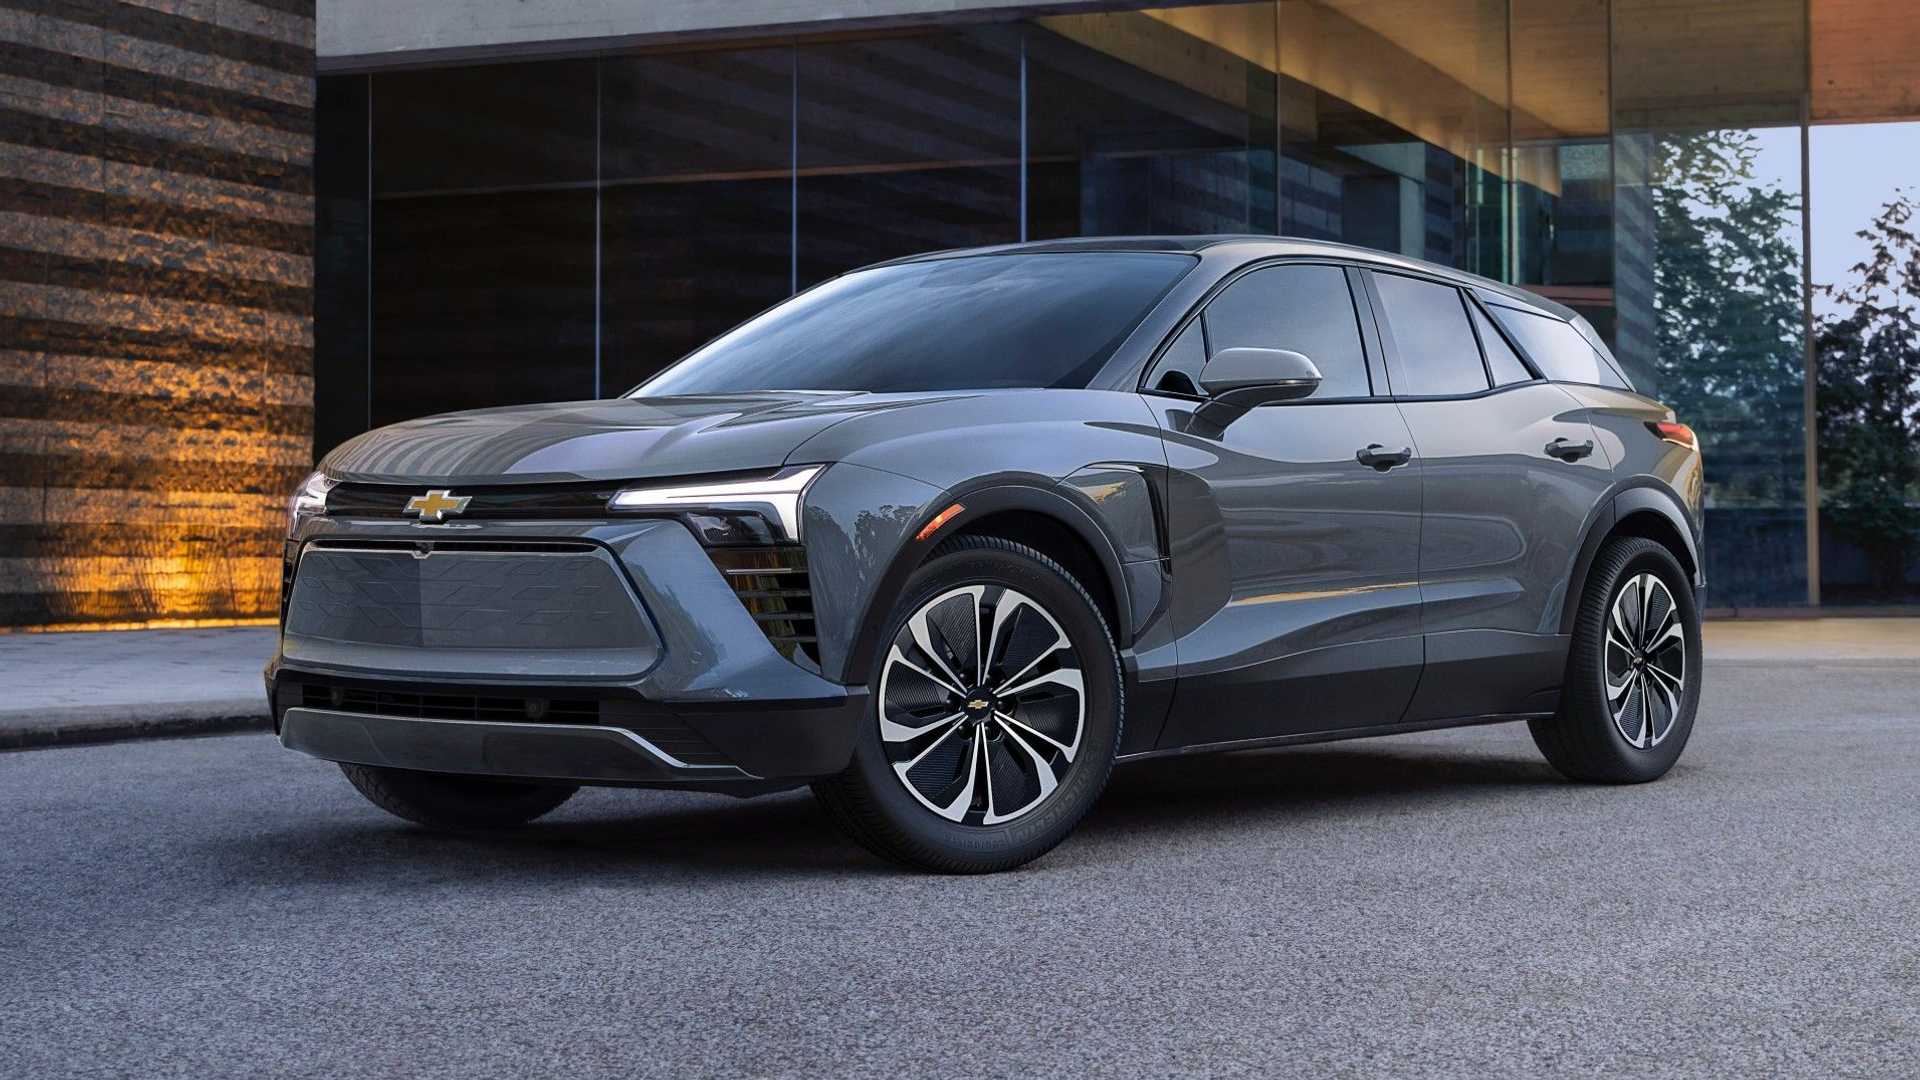 Chevrolet introduced an electric crossover Blazer for $45,000